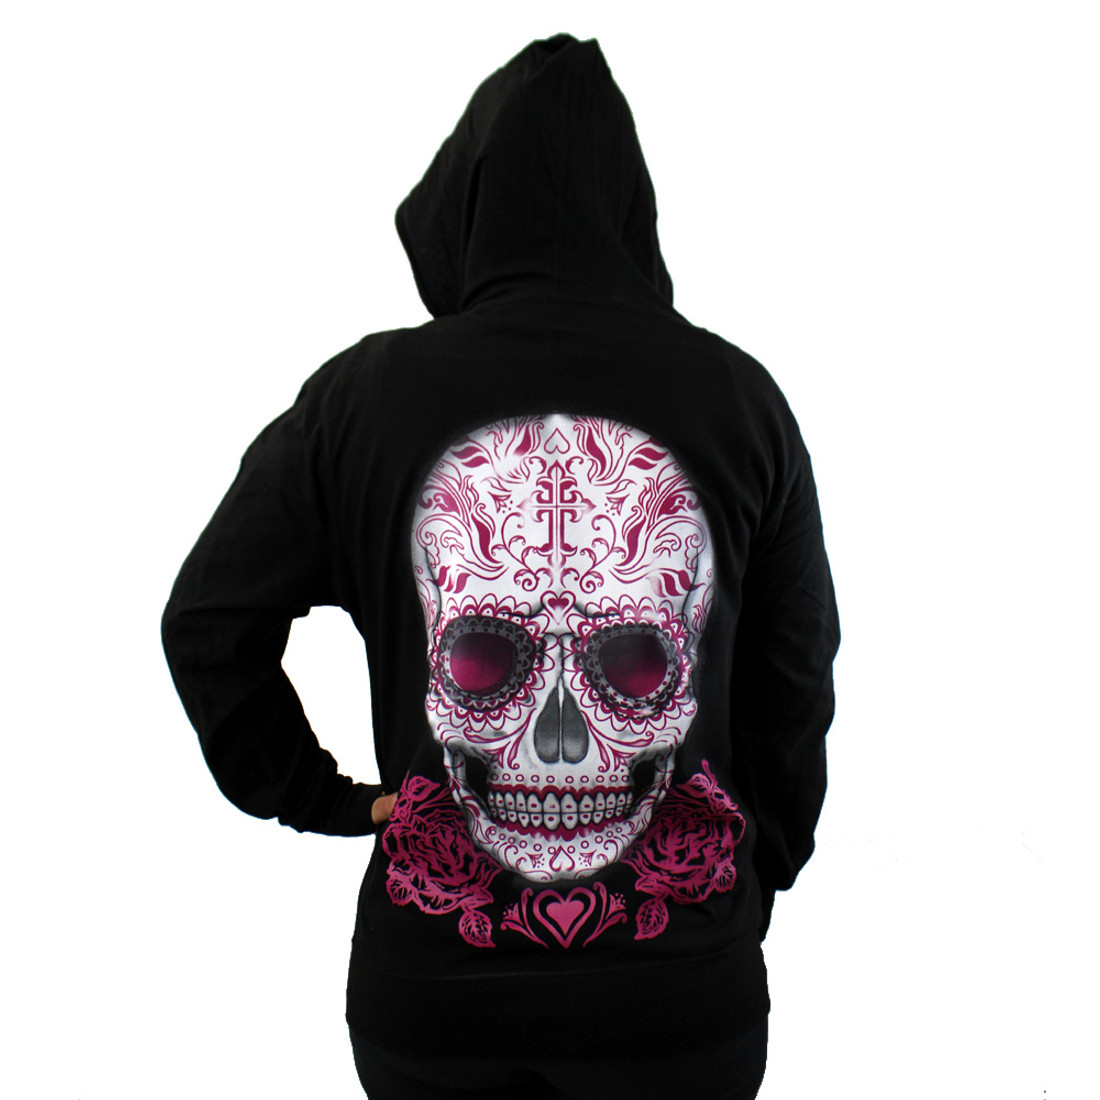 Day of the Dead skull hoodie.